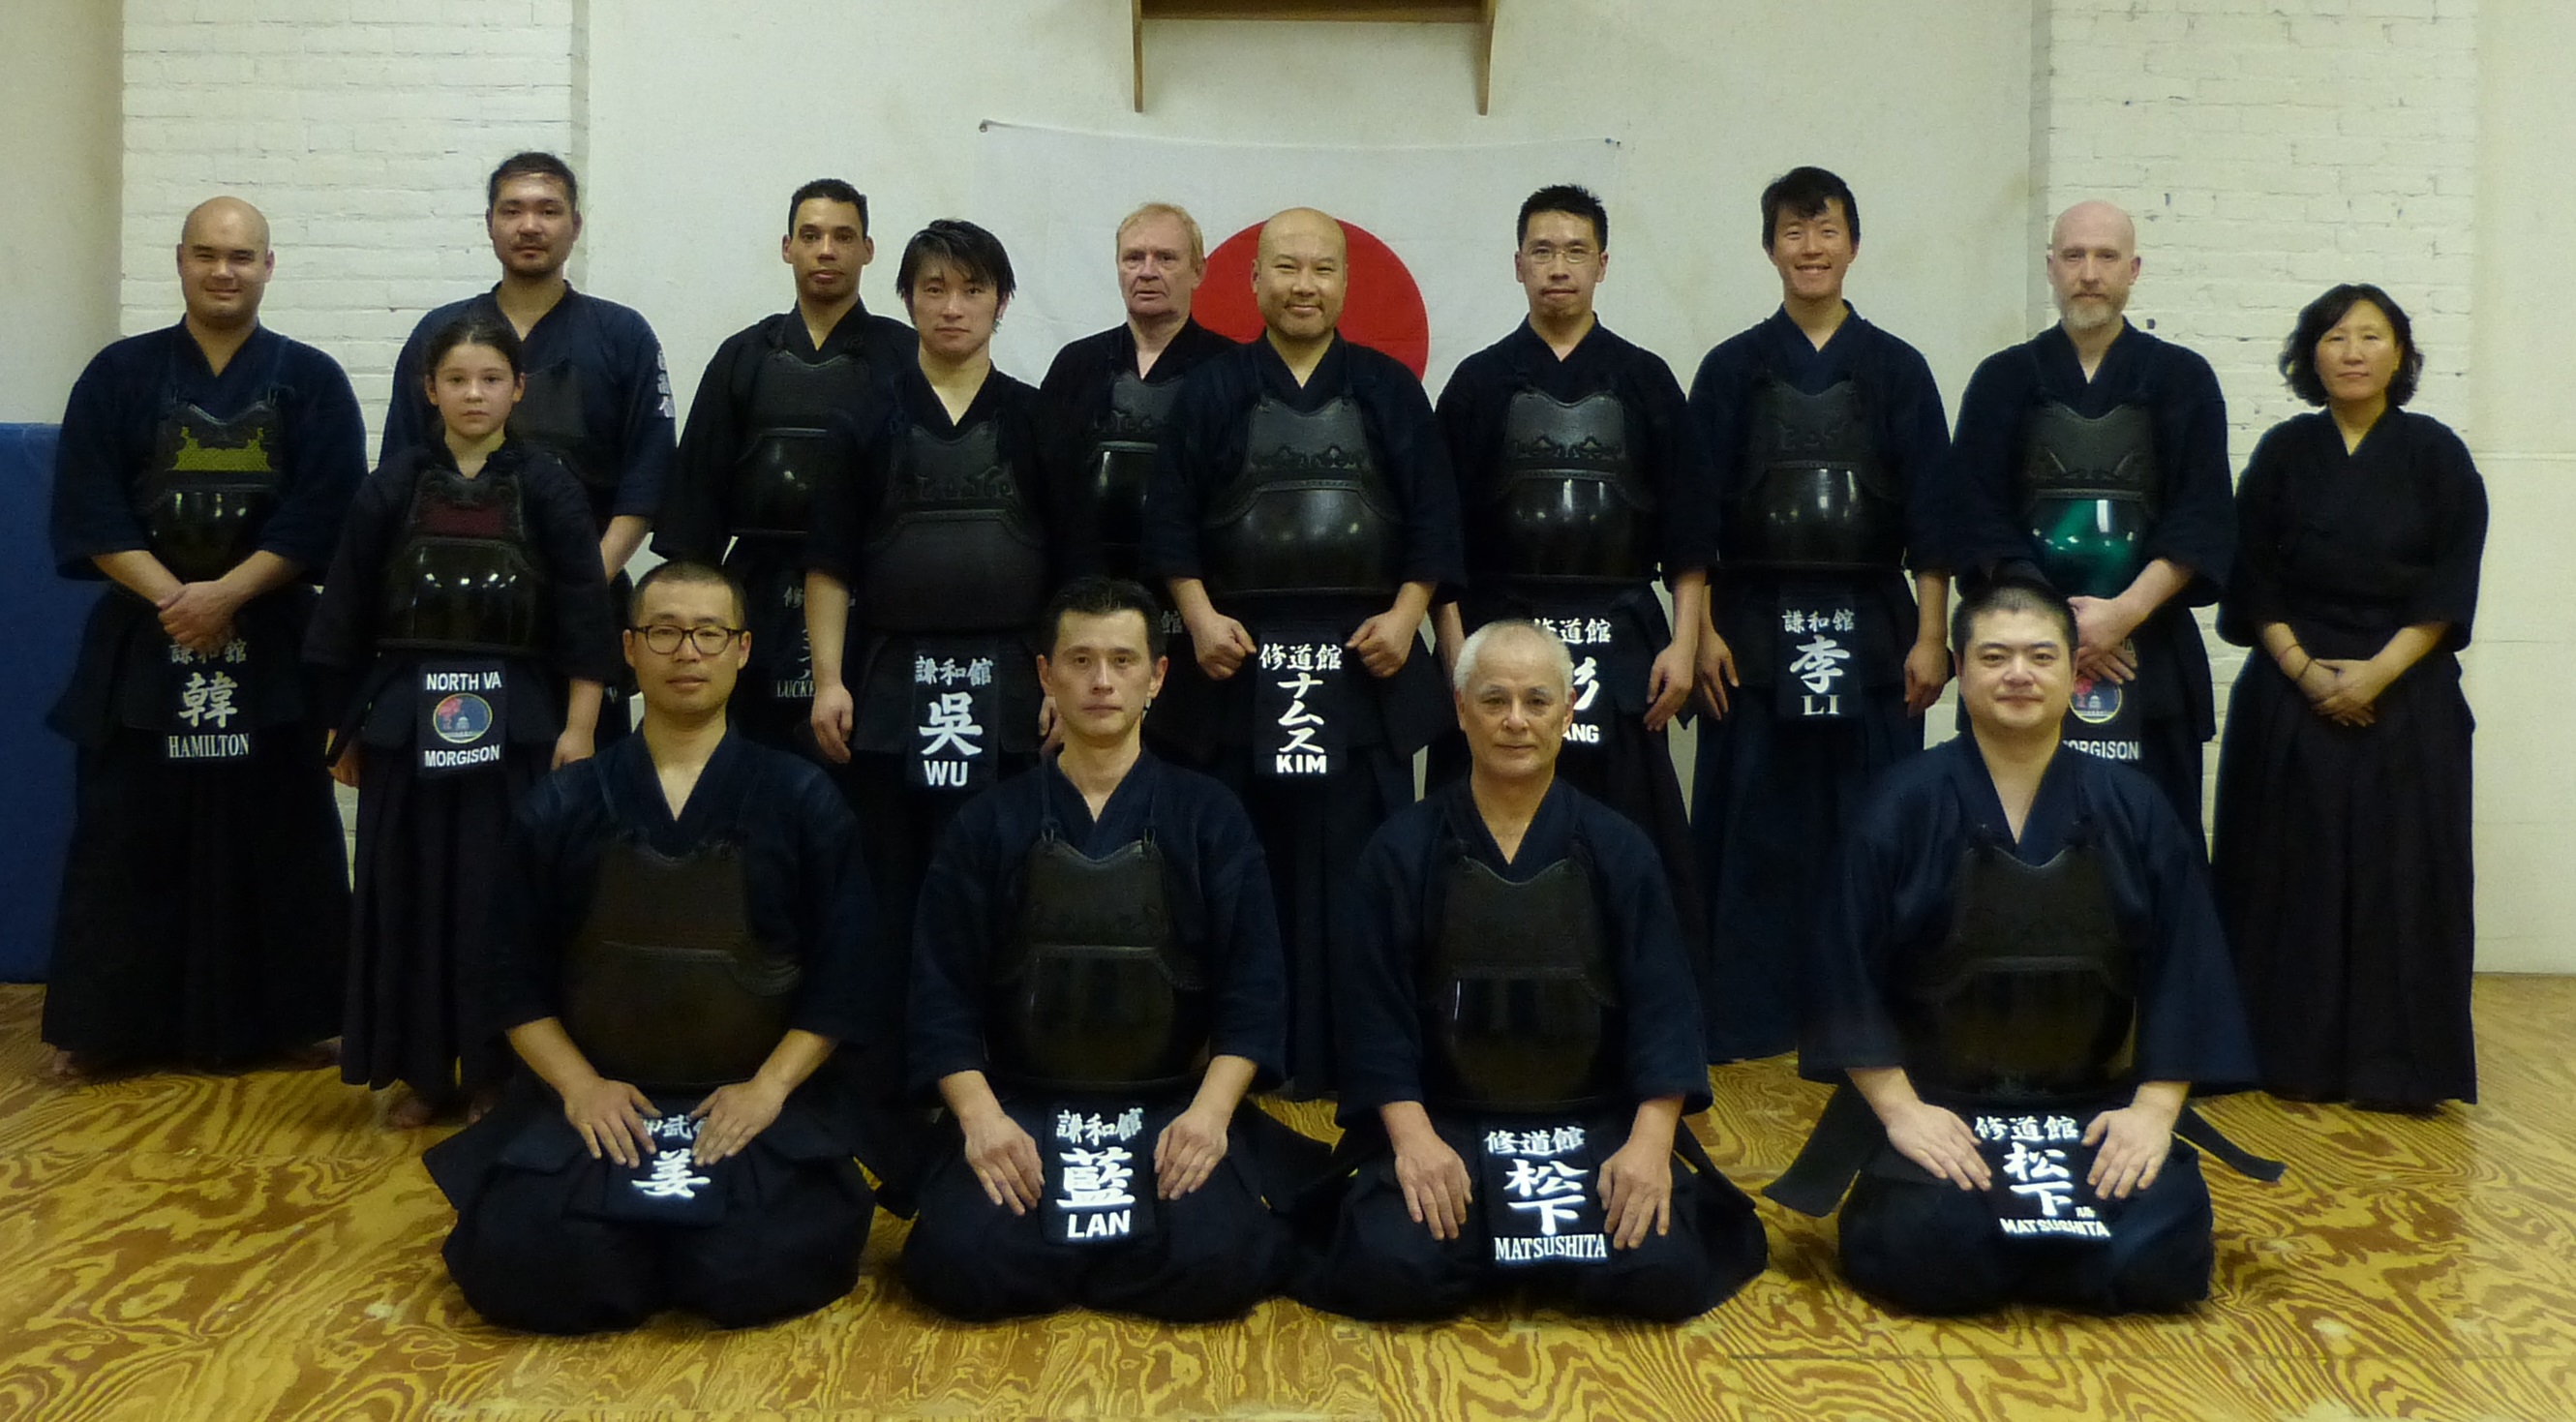 Group photo for Shudokan and Ken Wa Kan&rsquo;s Monthly Godogeiko on Sept. 8, 2019. (Credit: Beongjoon Kang)